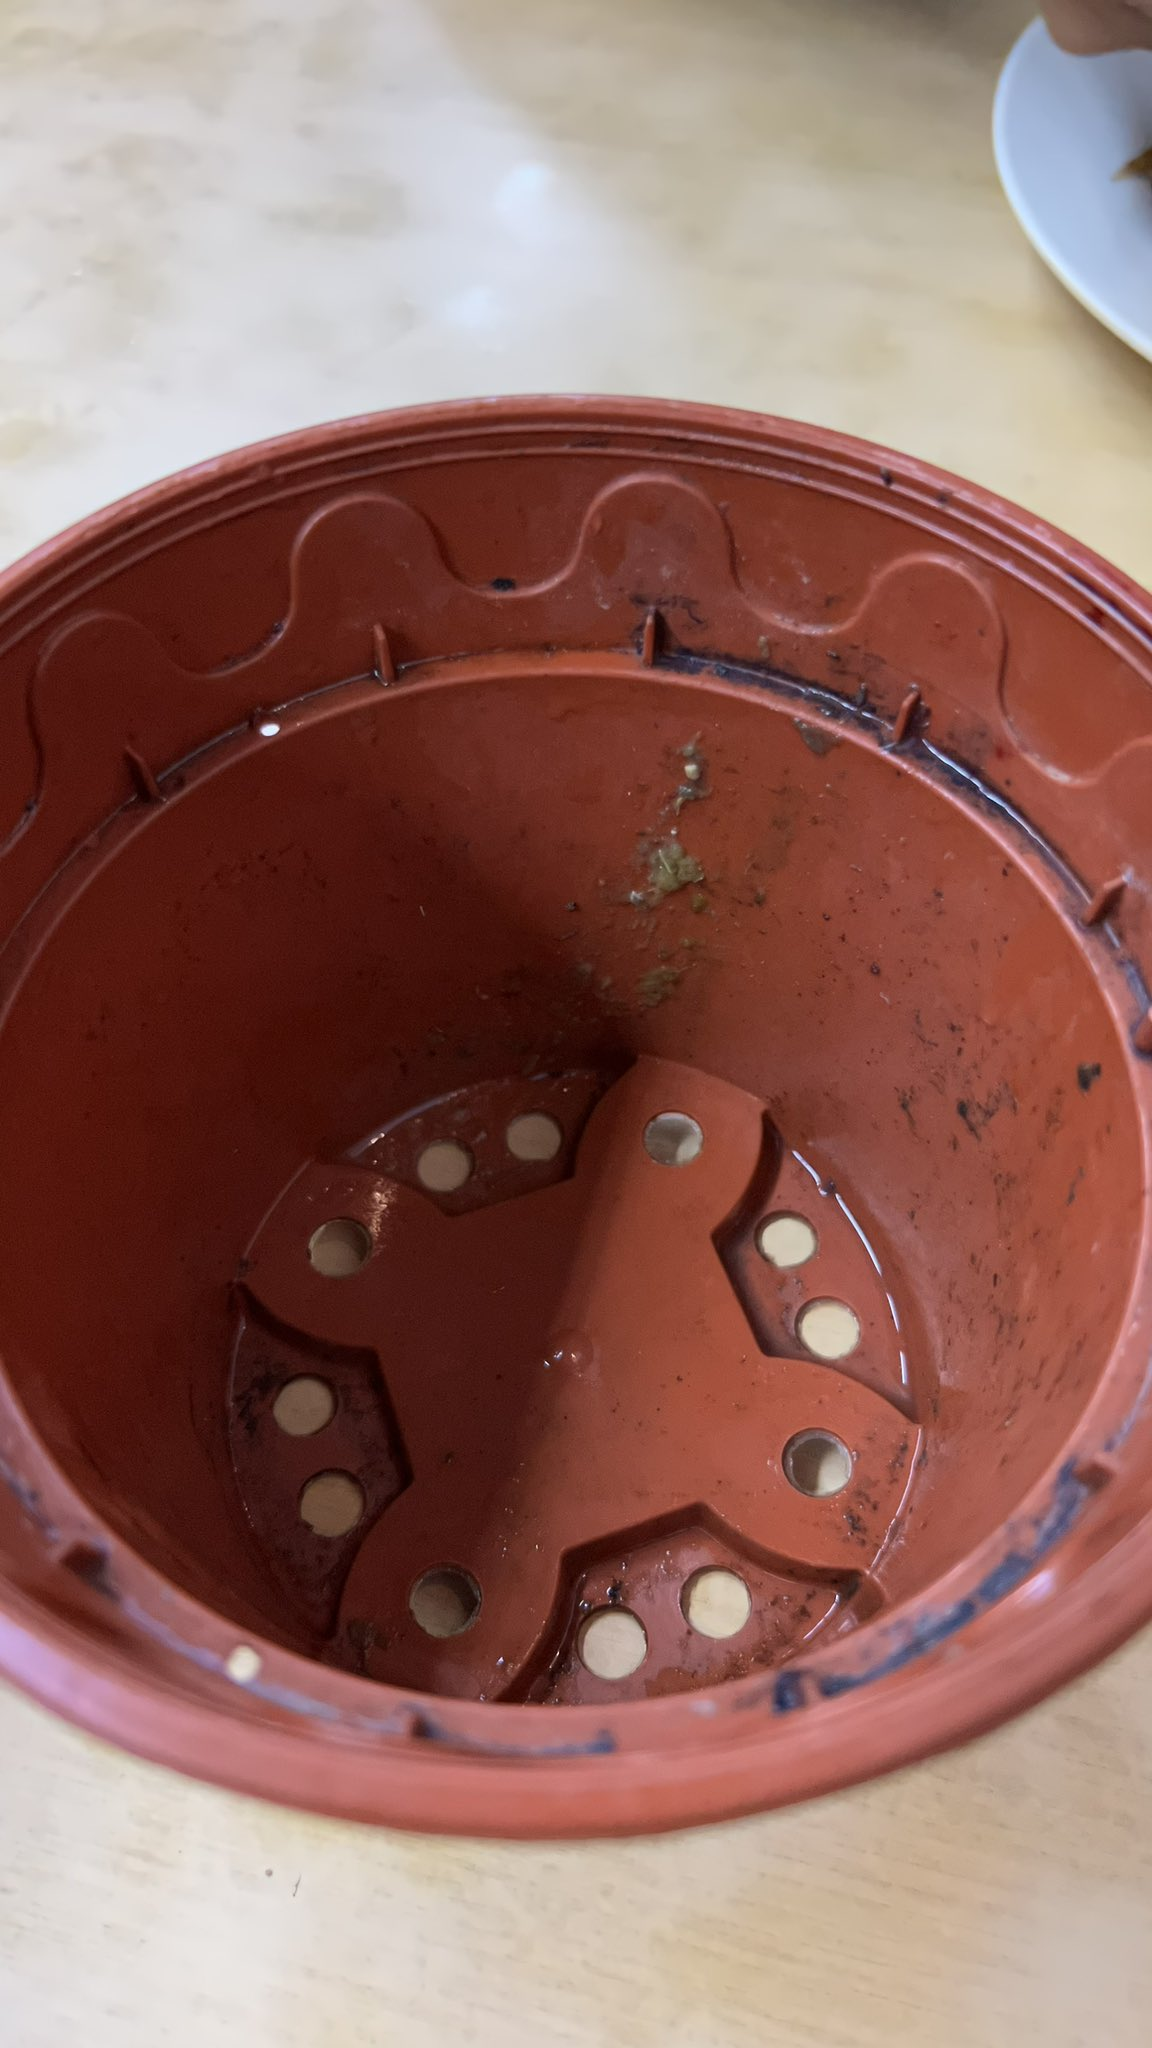 M'sian eatery serves drink in dirty flower pot, gets bashed for lack of hygiene